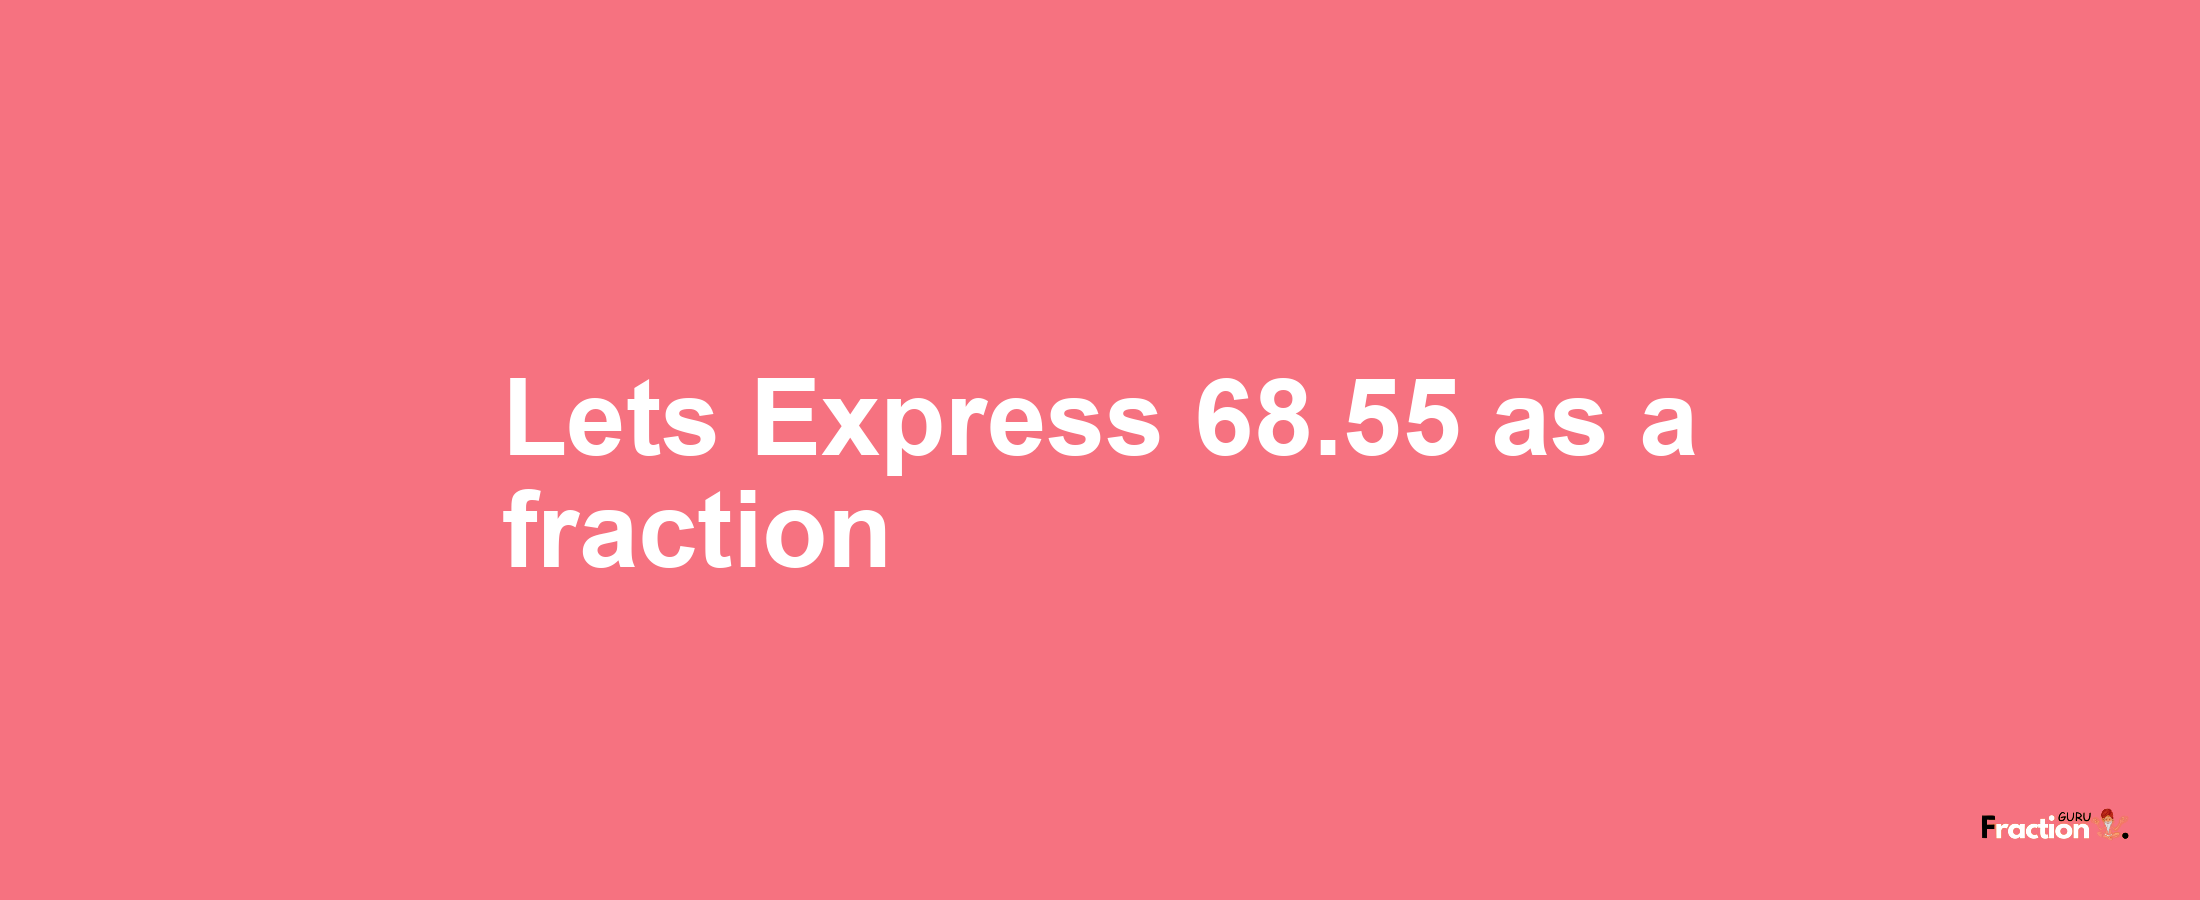 Lets Express 68.55 as afraction